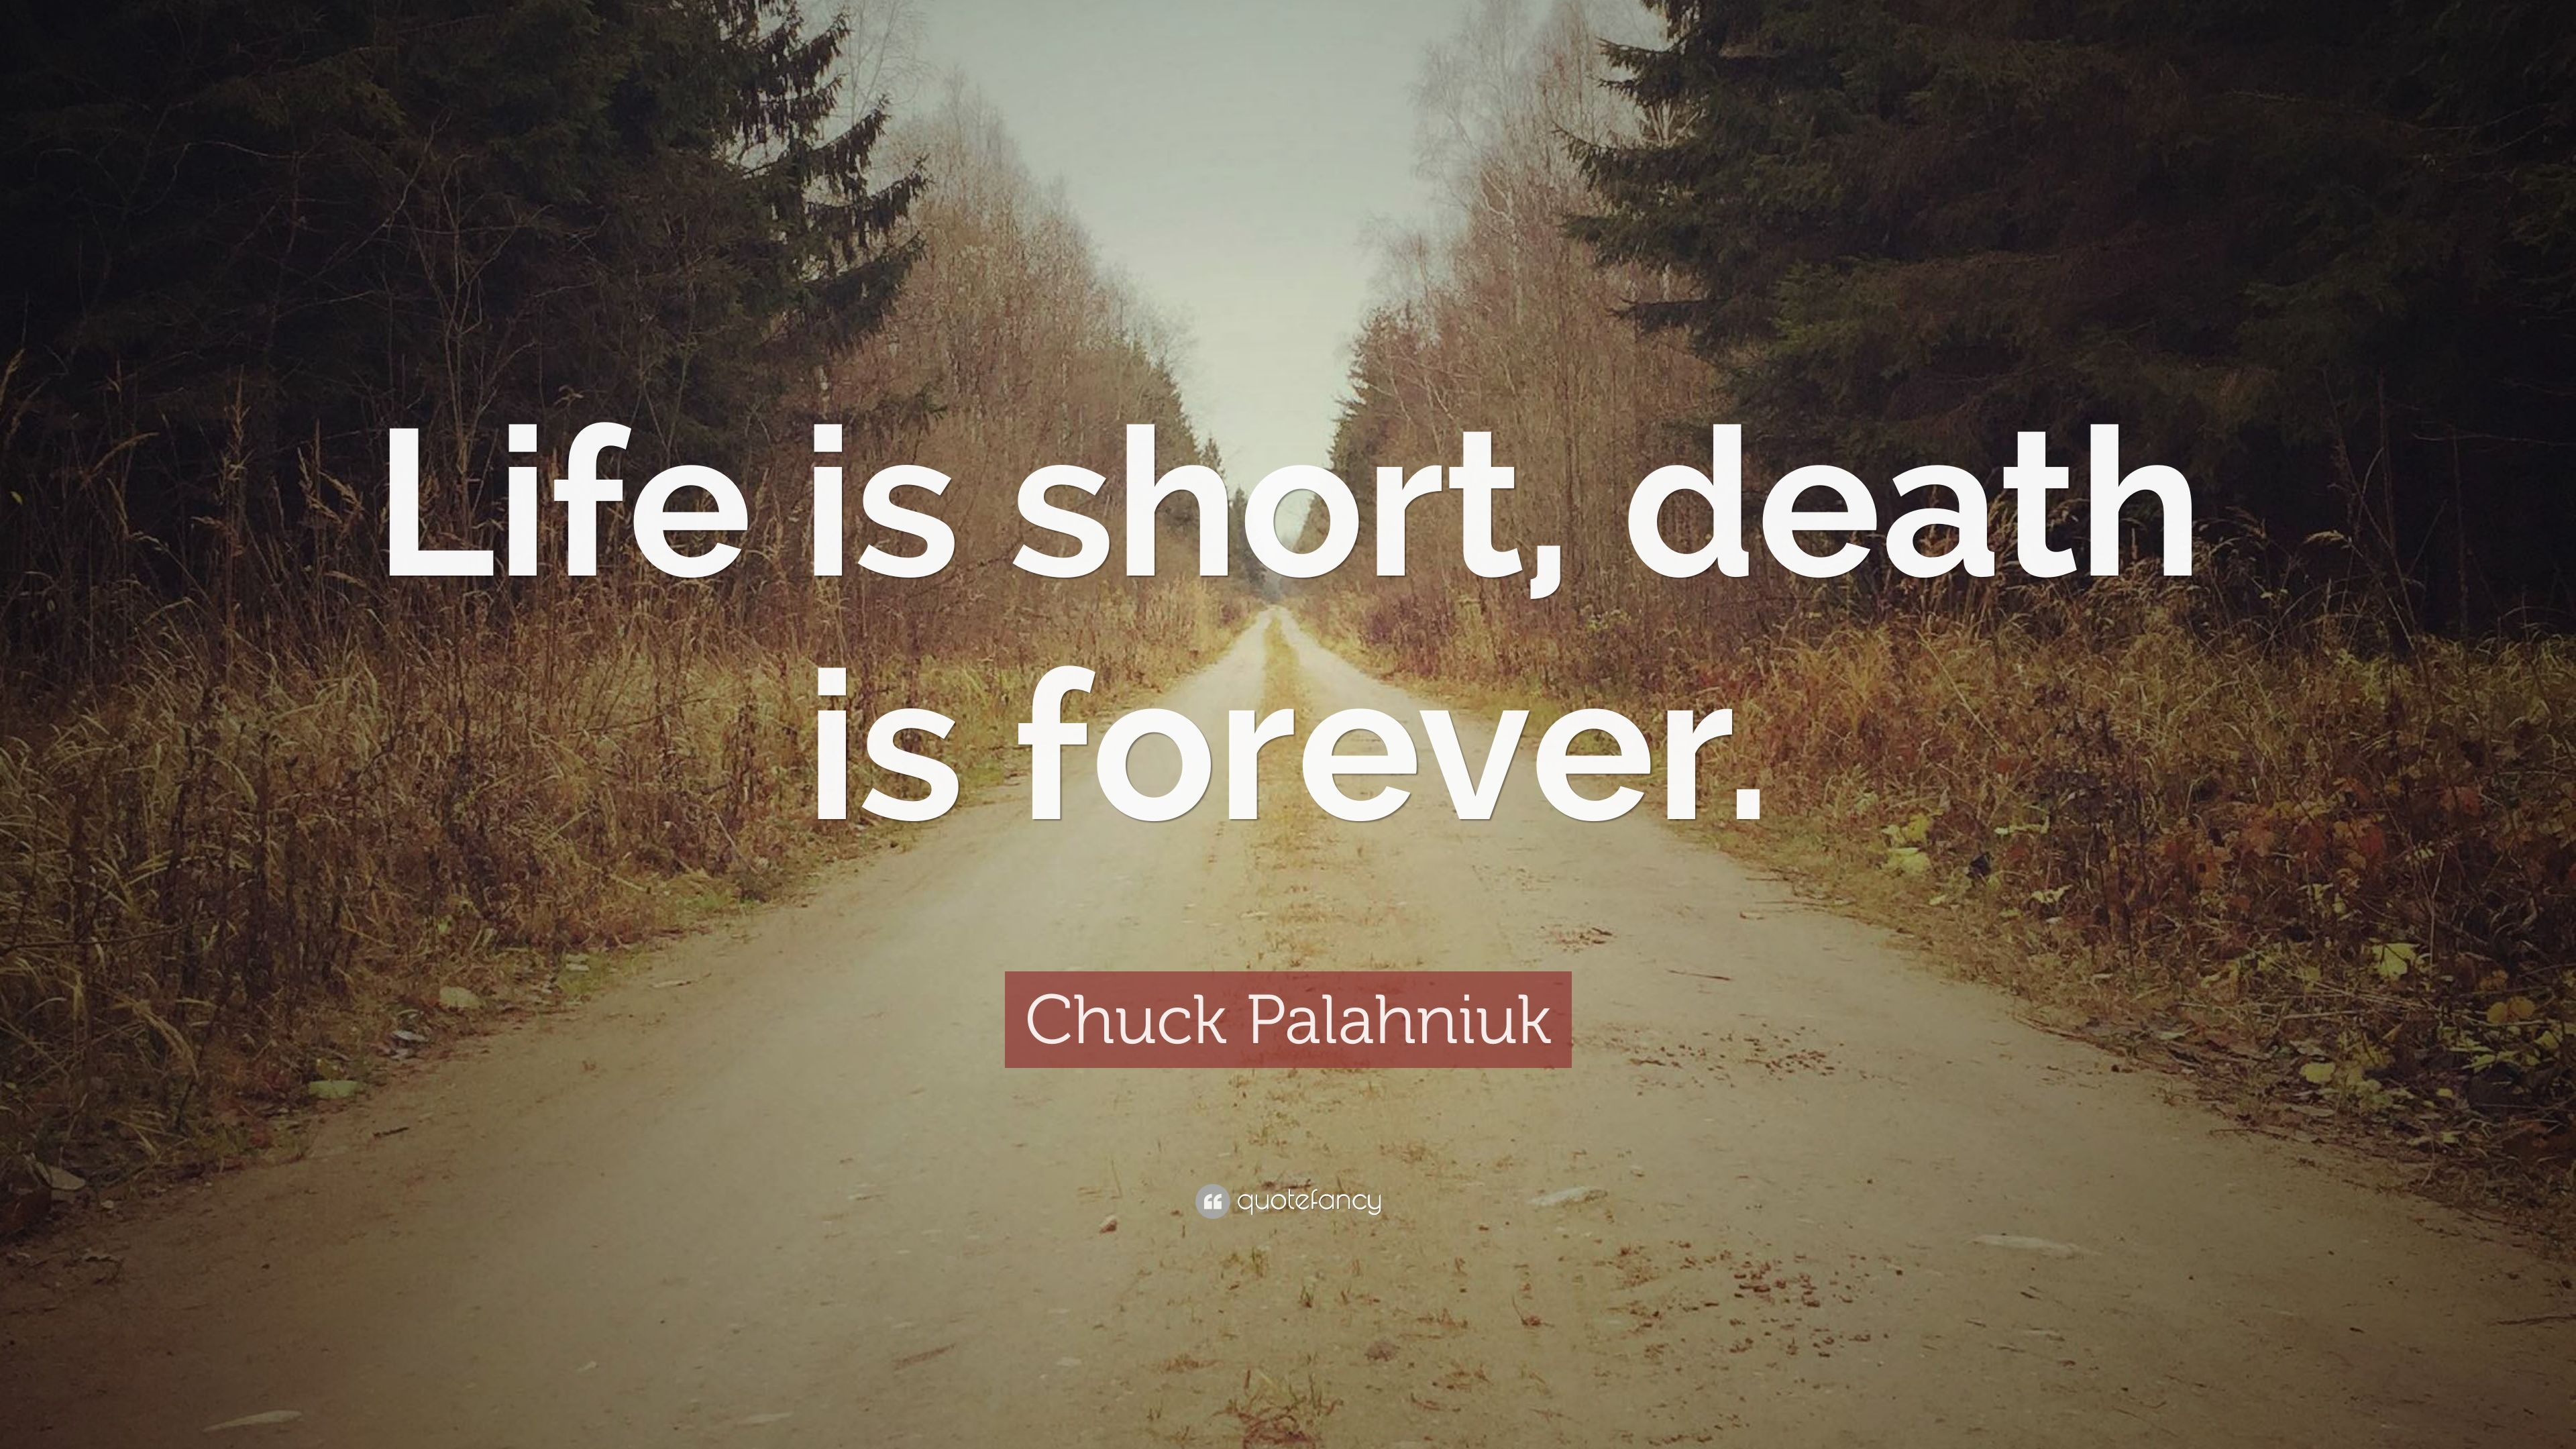 Chuck Palahniuk Quote: “Life is short, death is forever.” (12 wallpaper)